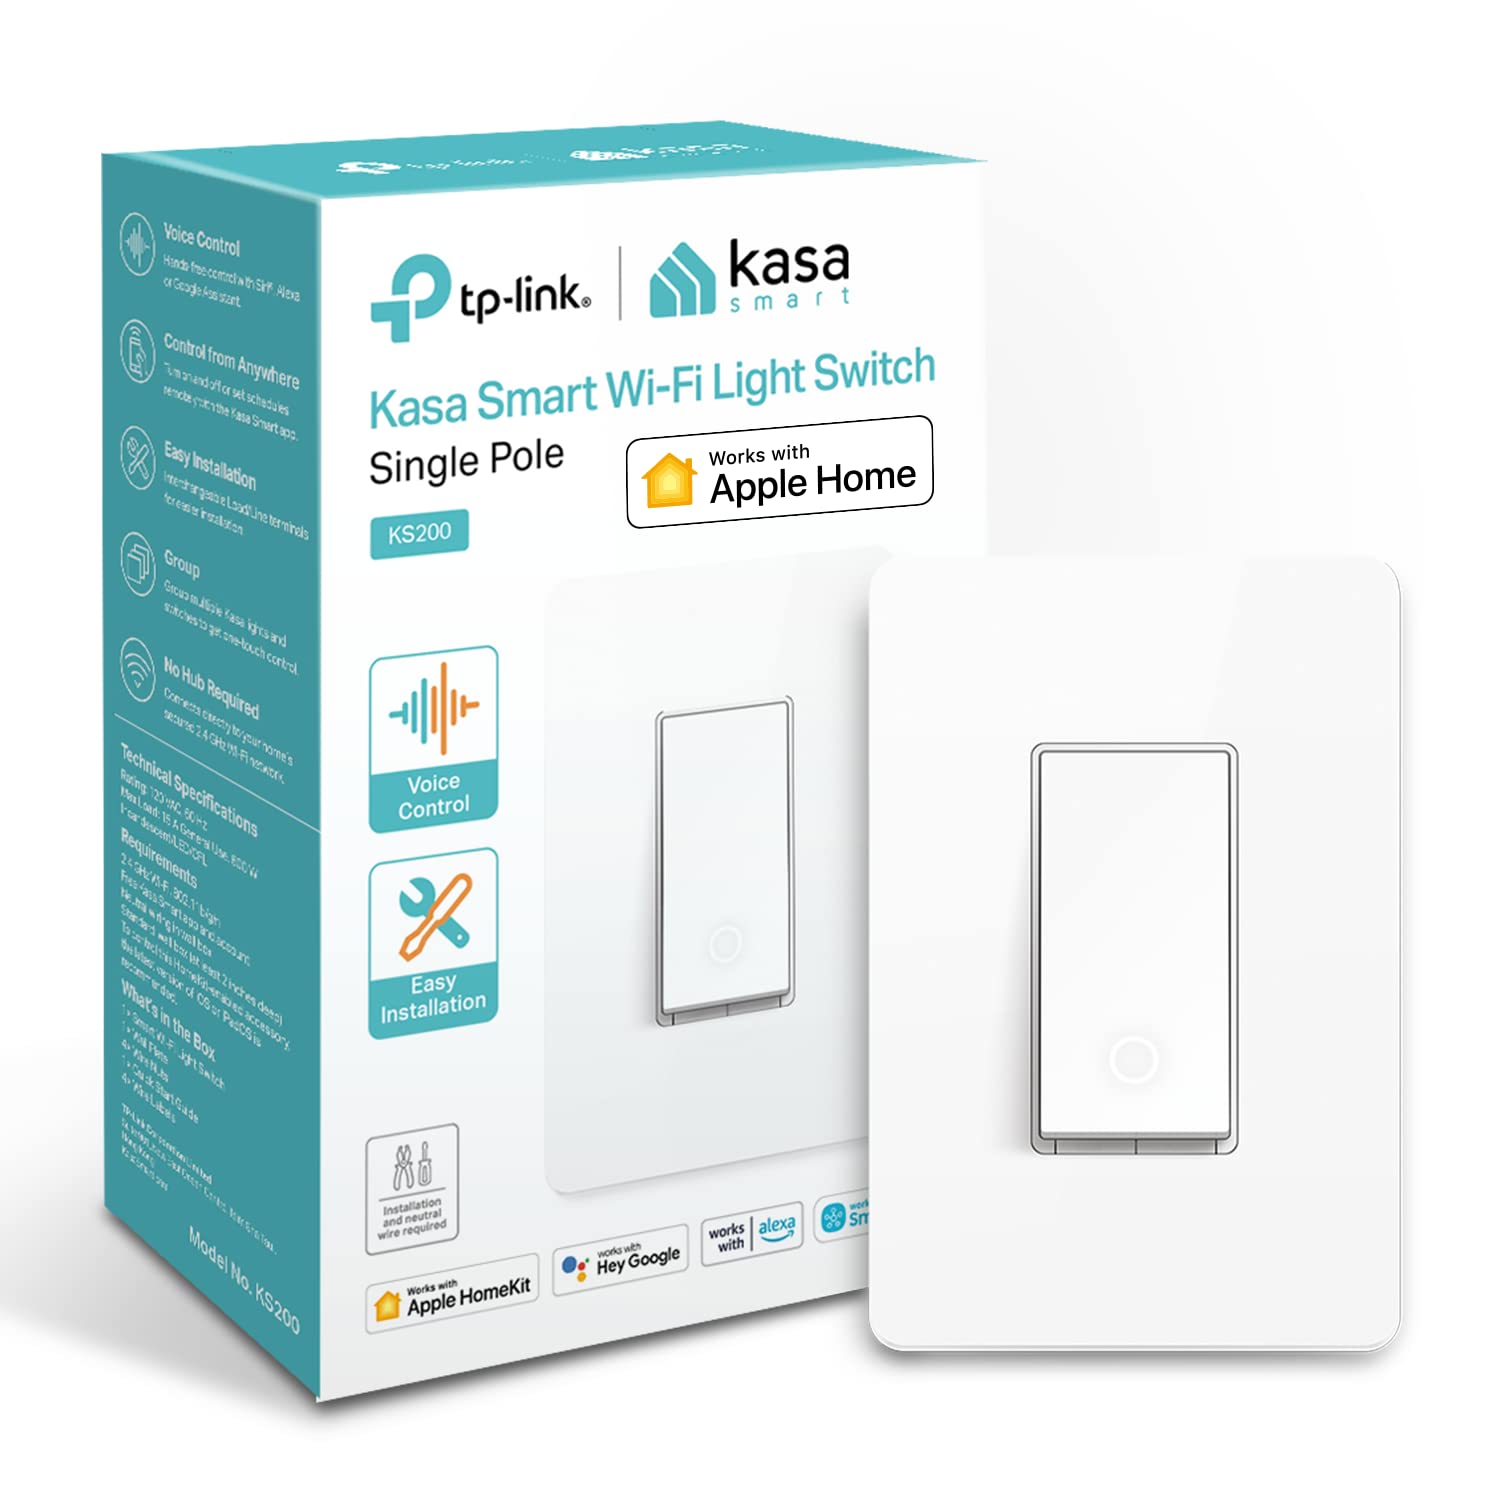 Kasa Apple HomeKit Smart Light Switch KS200, Single Pole, Neutral Wire Required, 2.4GHz Wi-Fi Light Switch Works with Siri, Alexa and Google Home, UL Certified, No Hub Required, White